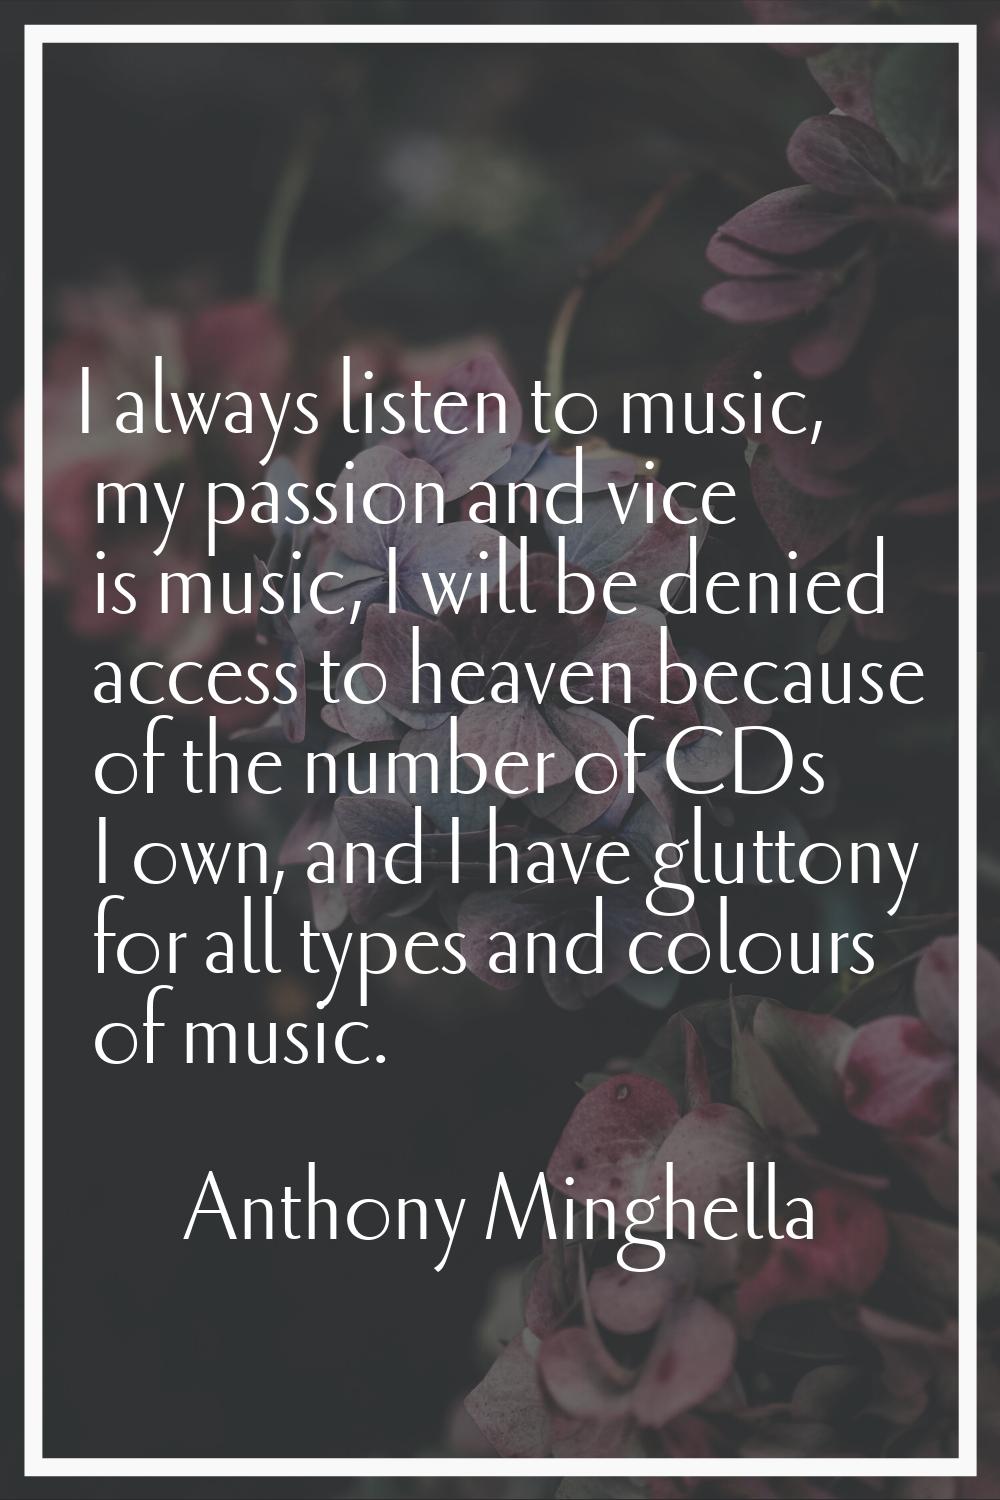 I always listen to music, my passion and vice is music, I will be denied access to heaven because o